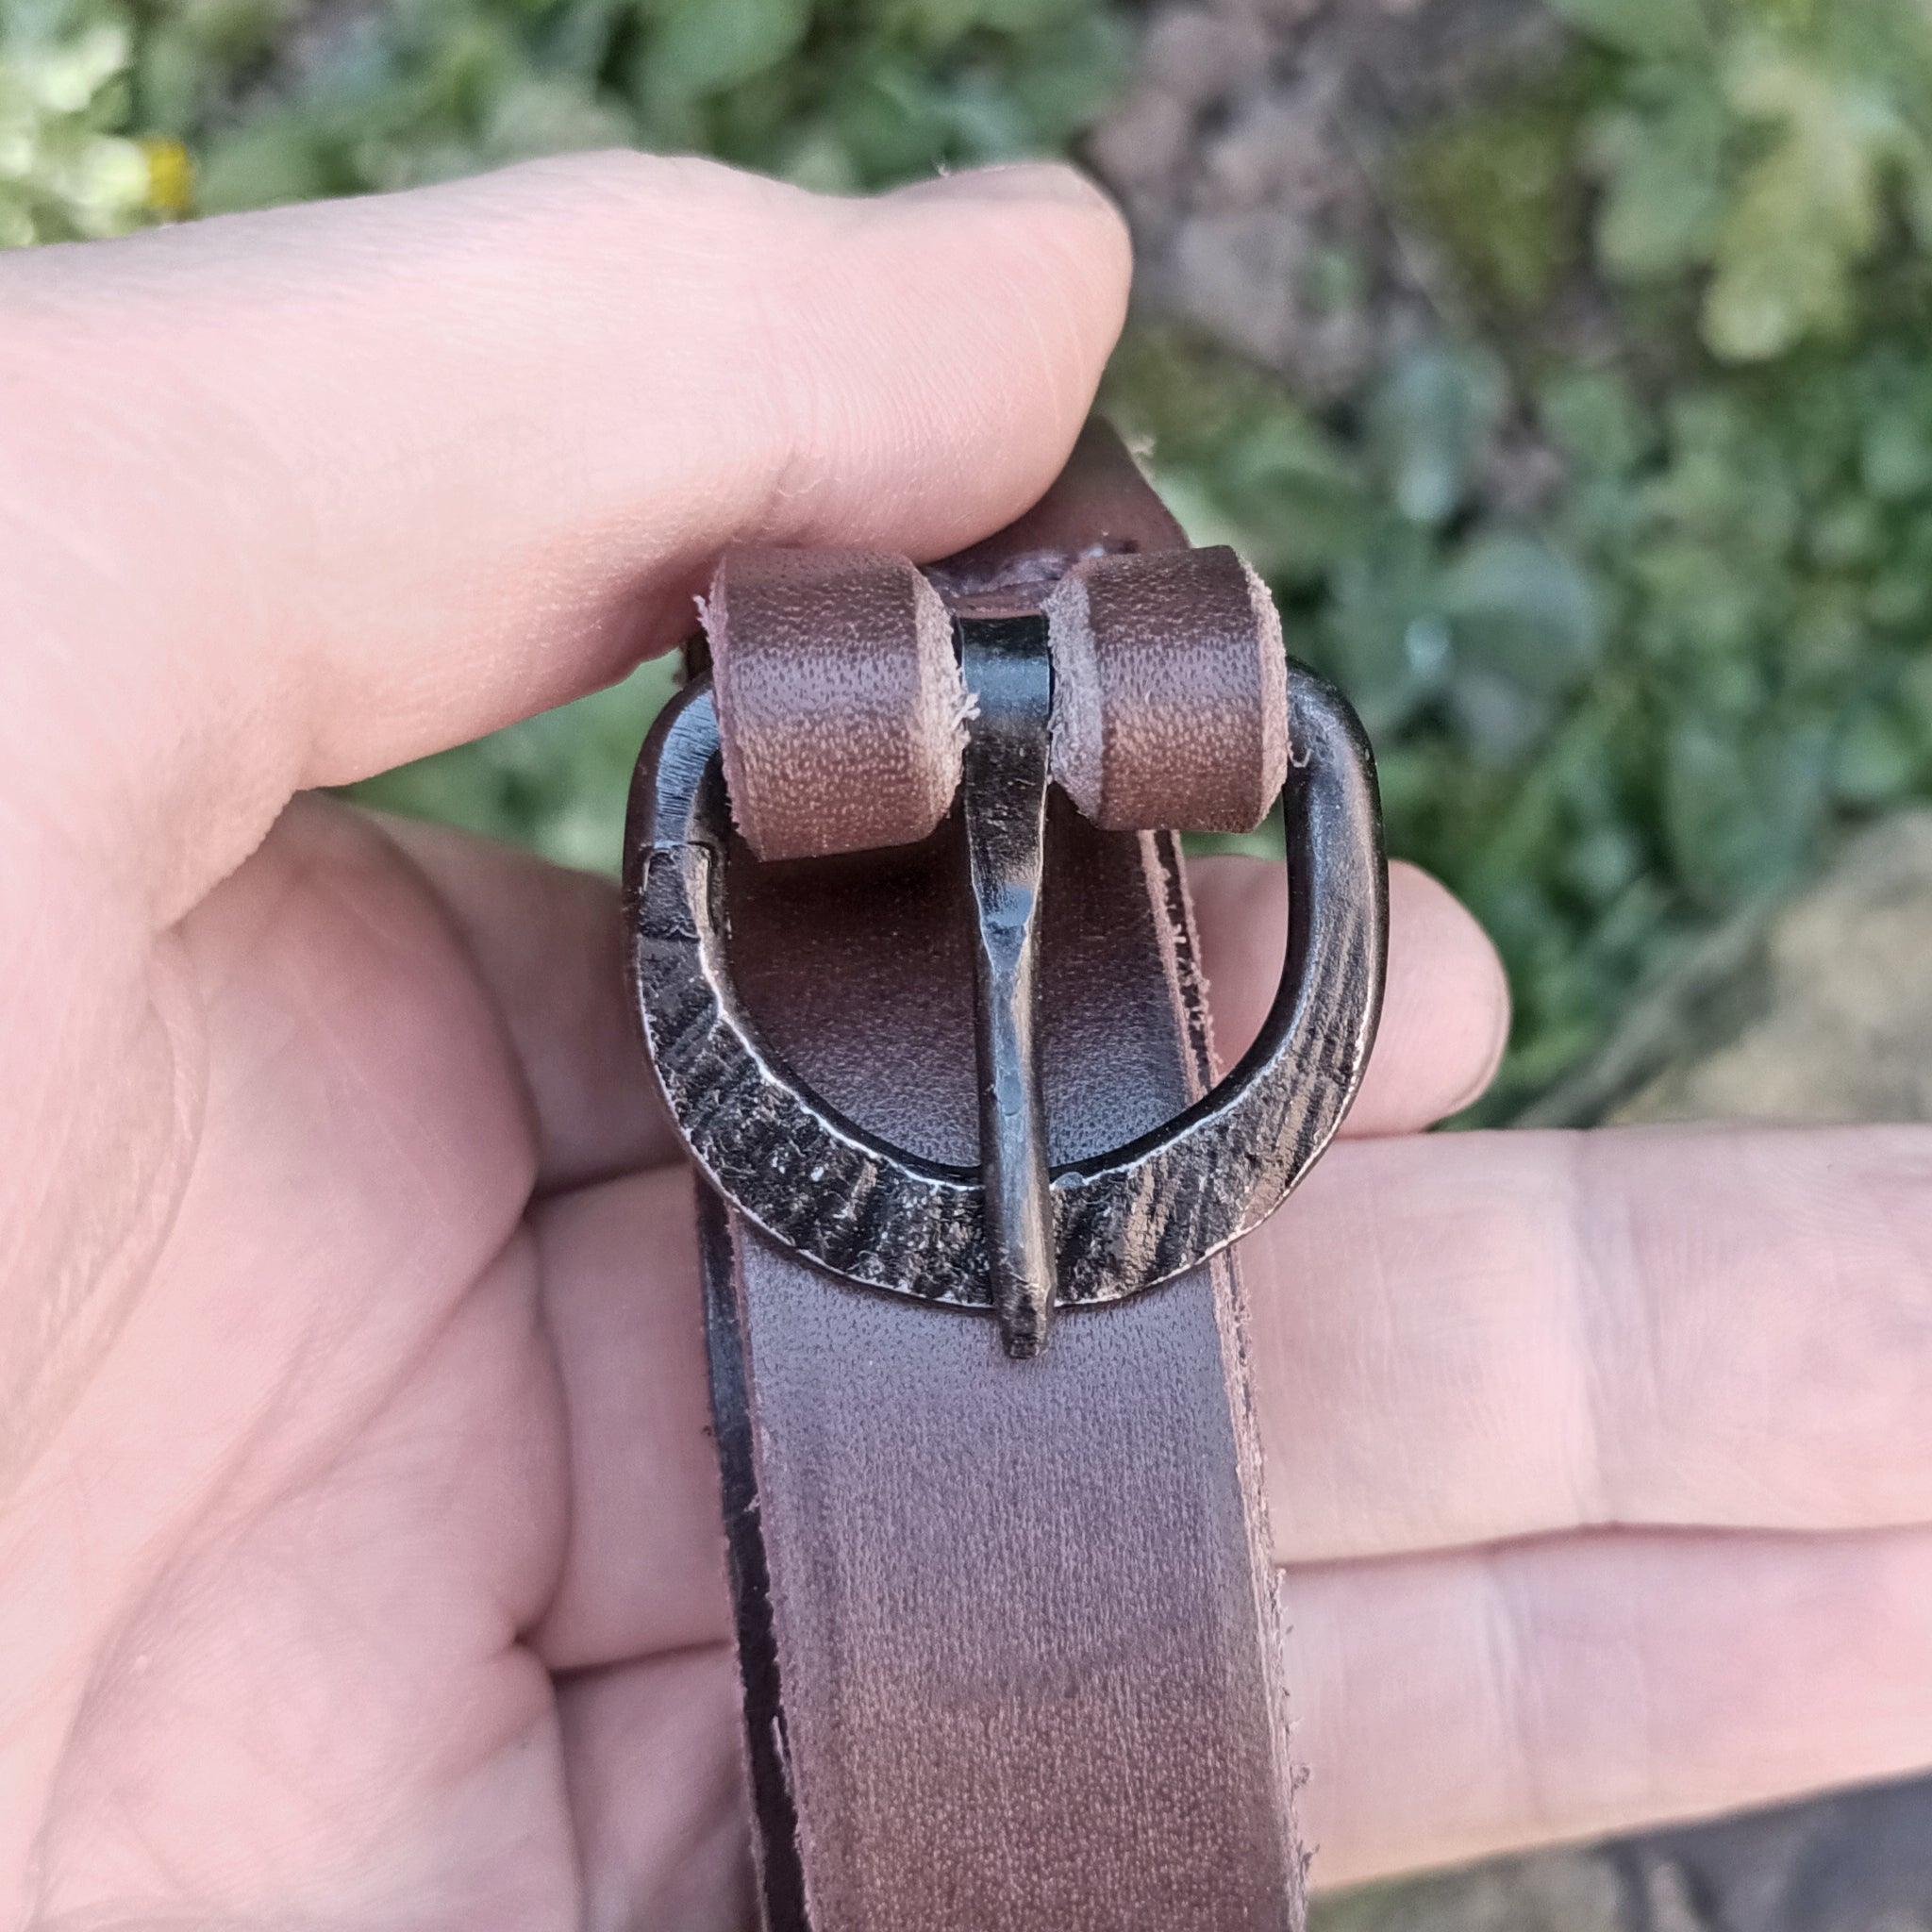 Long Viking / Medieval Belt with Hand-Forged Iron Buckle - 20mm (0.75 inch) Width in Hand